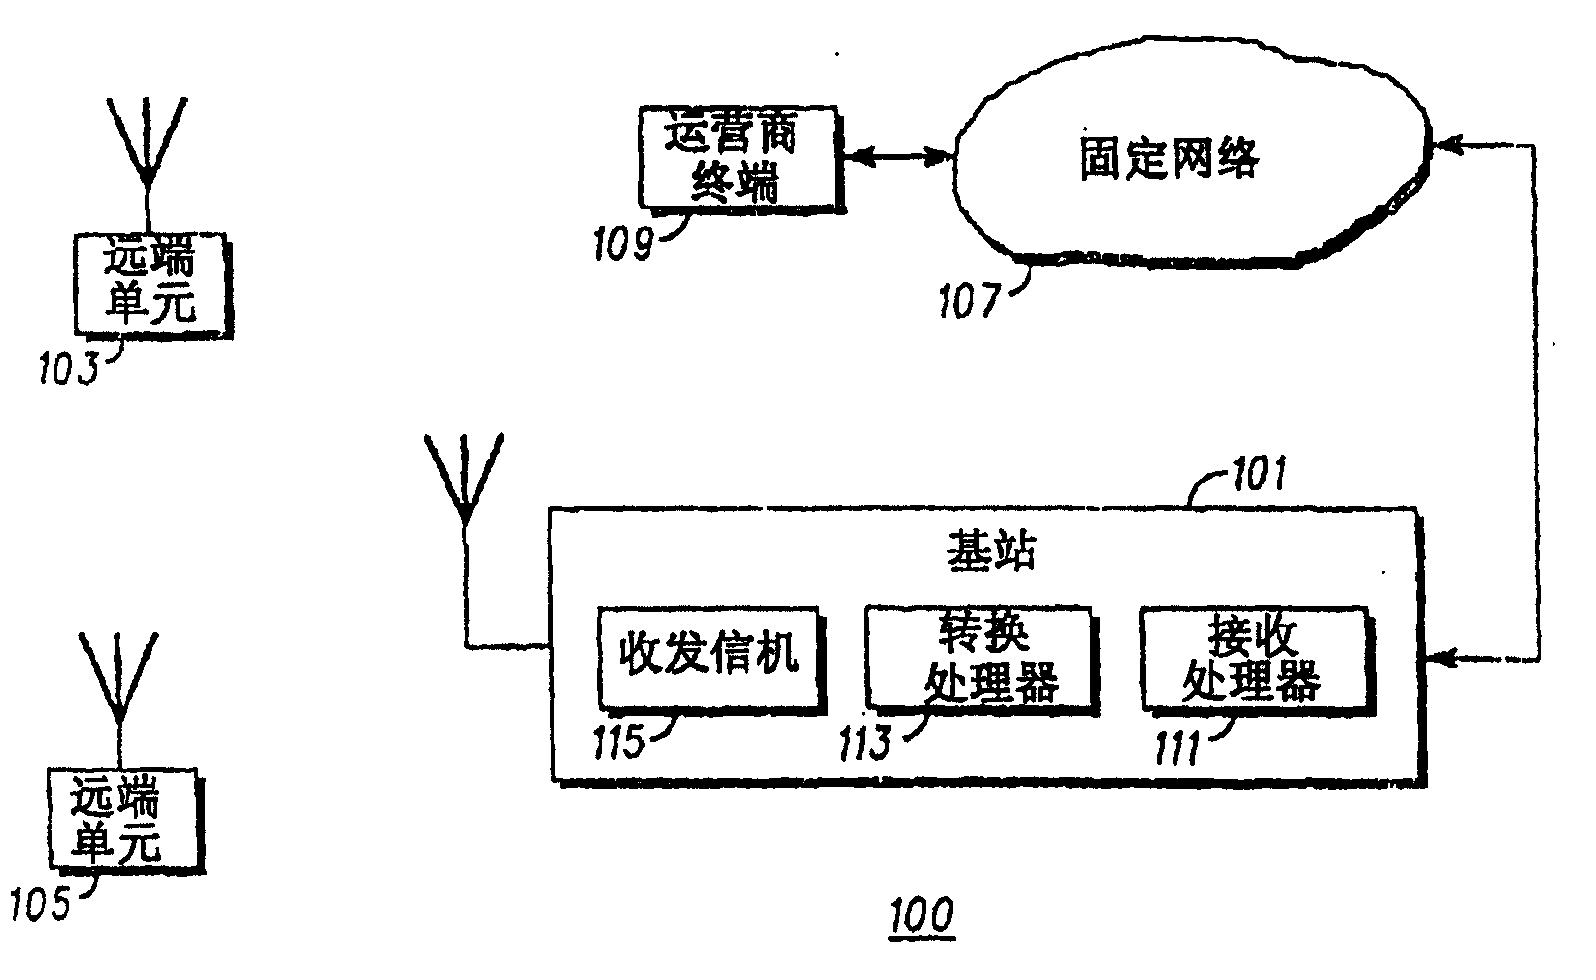 A cellular communication system, network element and method of operating the same